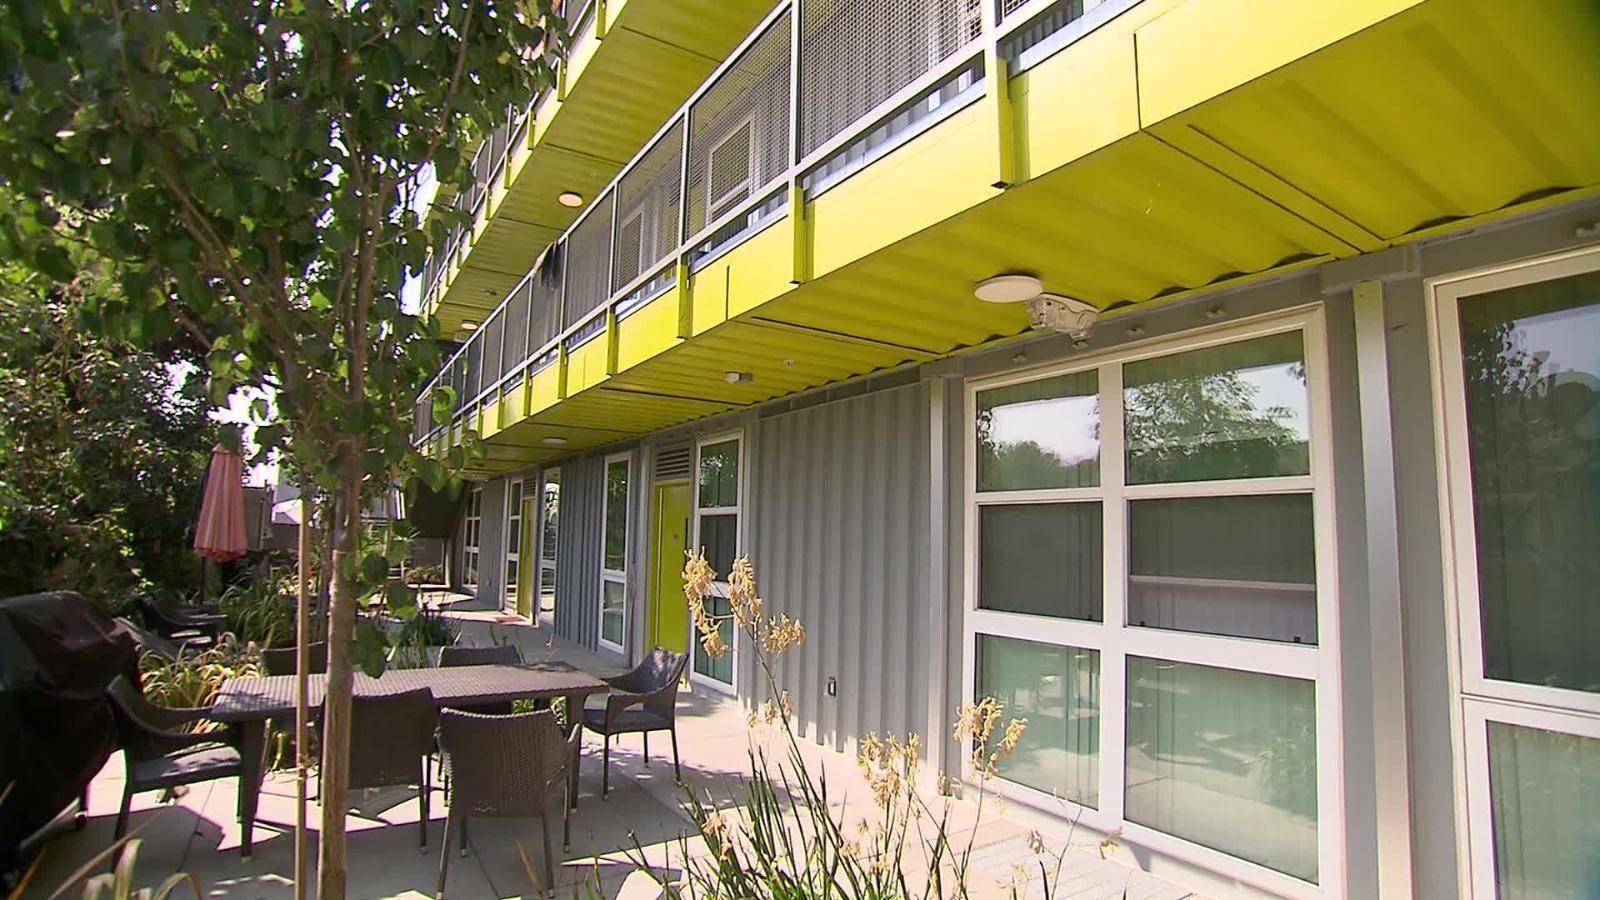 In Los Angeles Shipping Containers Becoming Homes For The Homeless Cnn